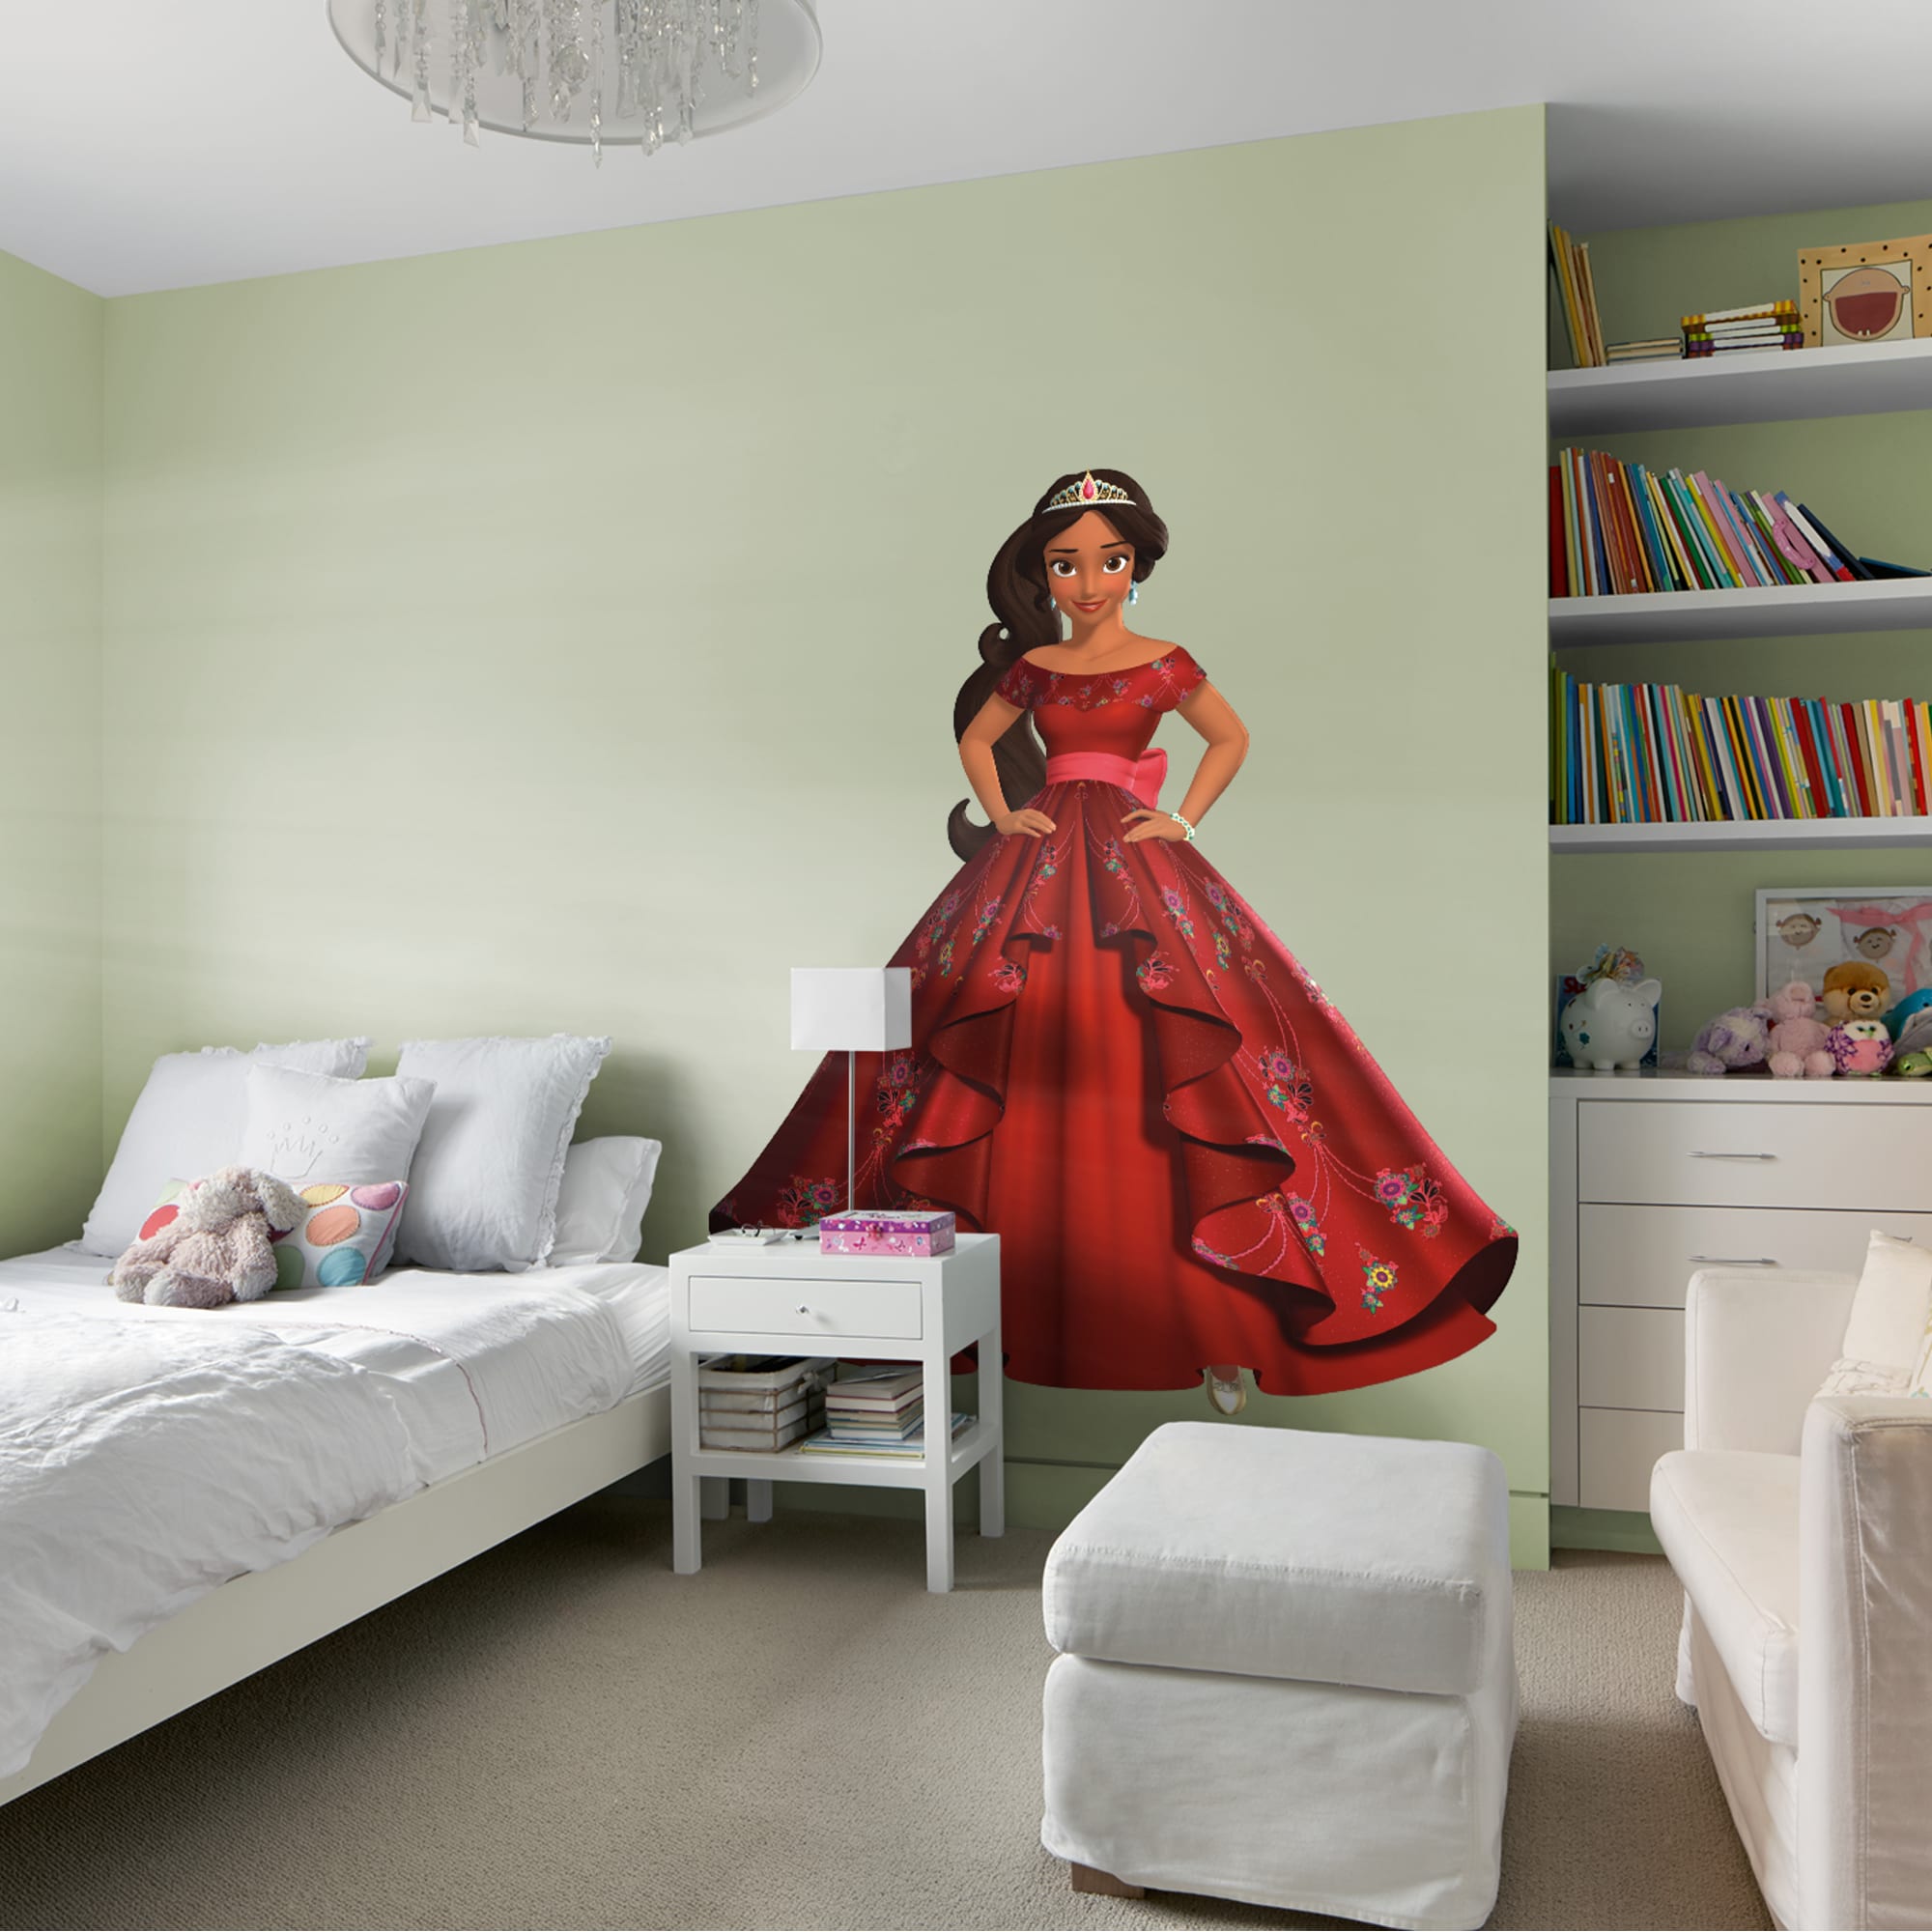 Elena of Avalor - Officially Licensed Disney Removable Wall Decal 55.0"W x 66.0"H by Fathead | Vinyl